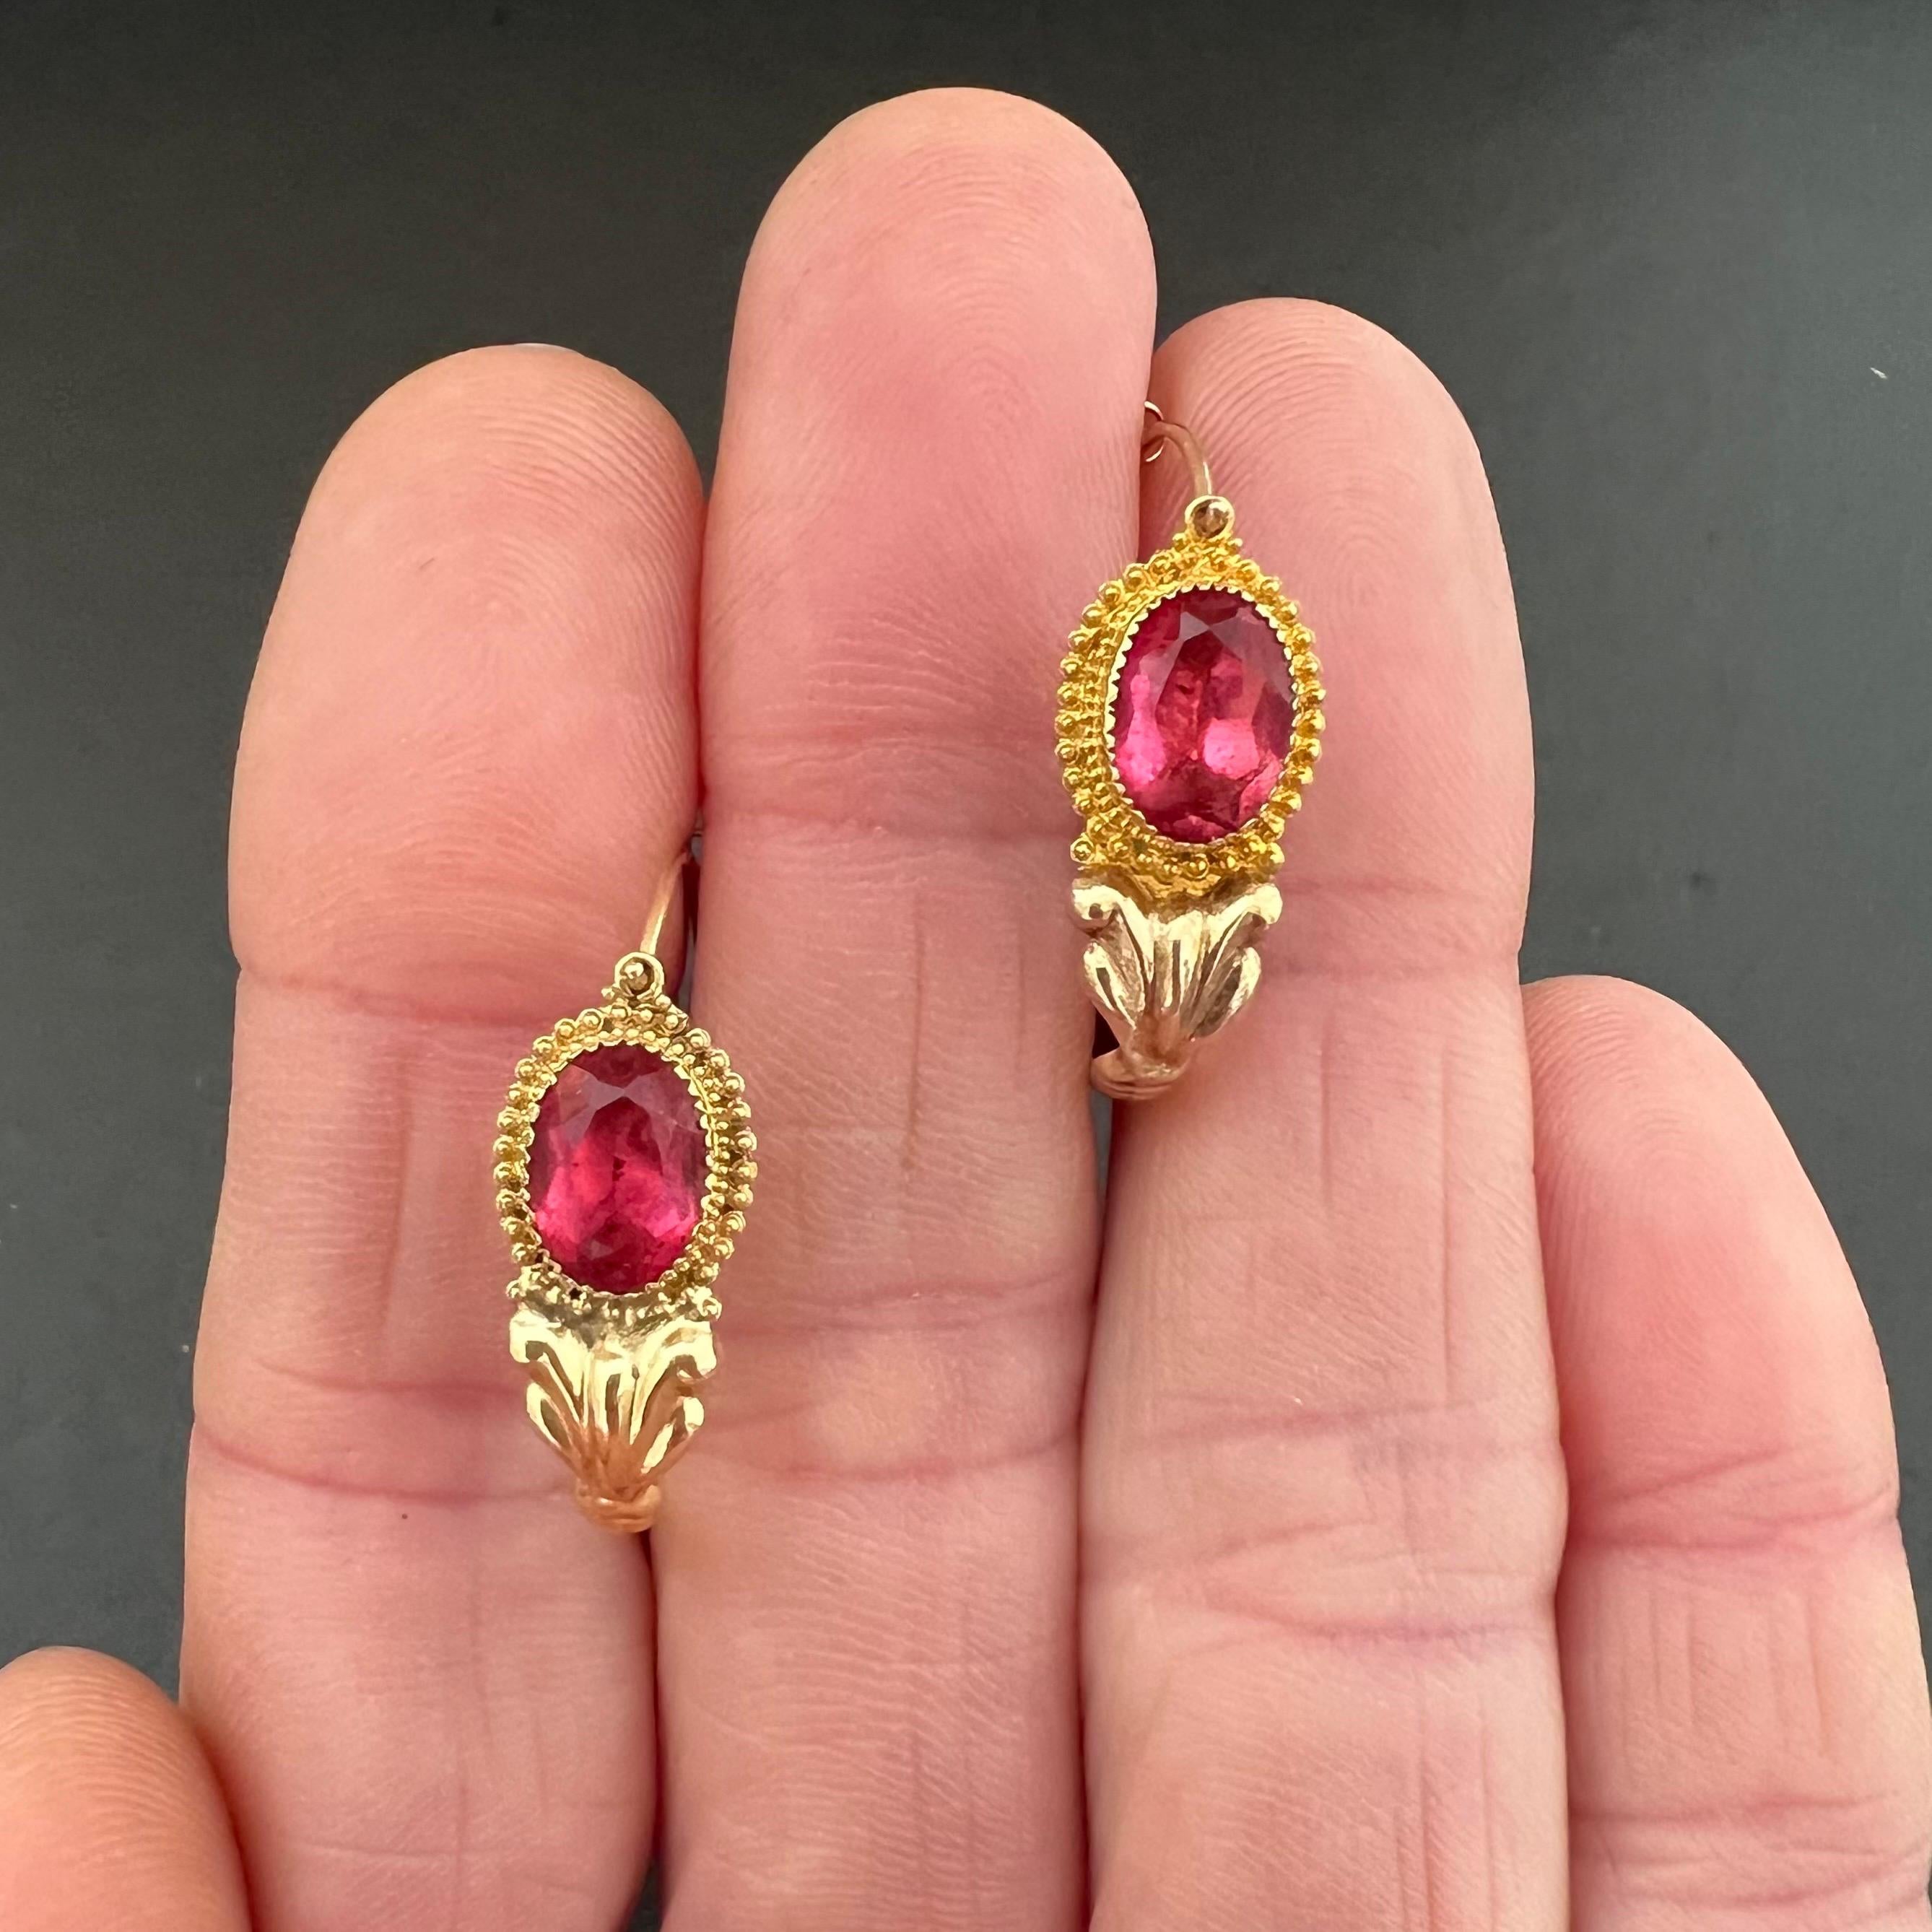 Antique Georgian Ruby Paste Glass Stone Poissarde Earrings In Good Condition For Sale In Rotterdam, NL